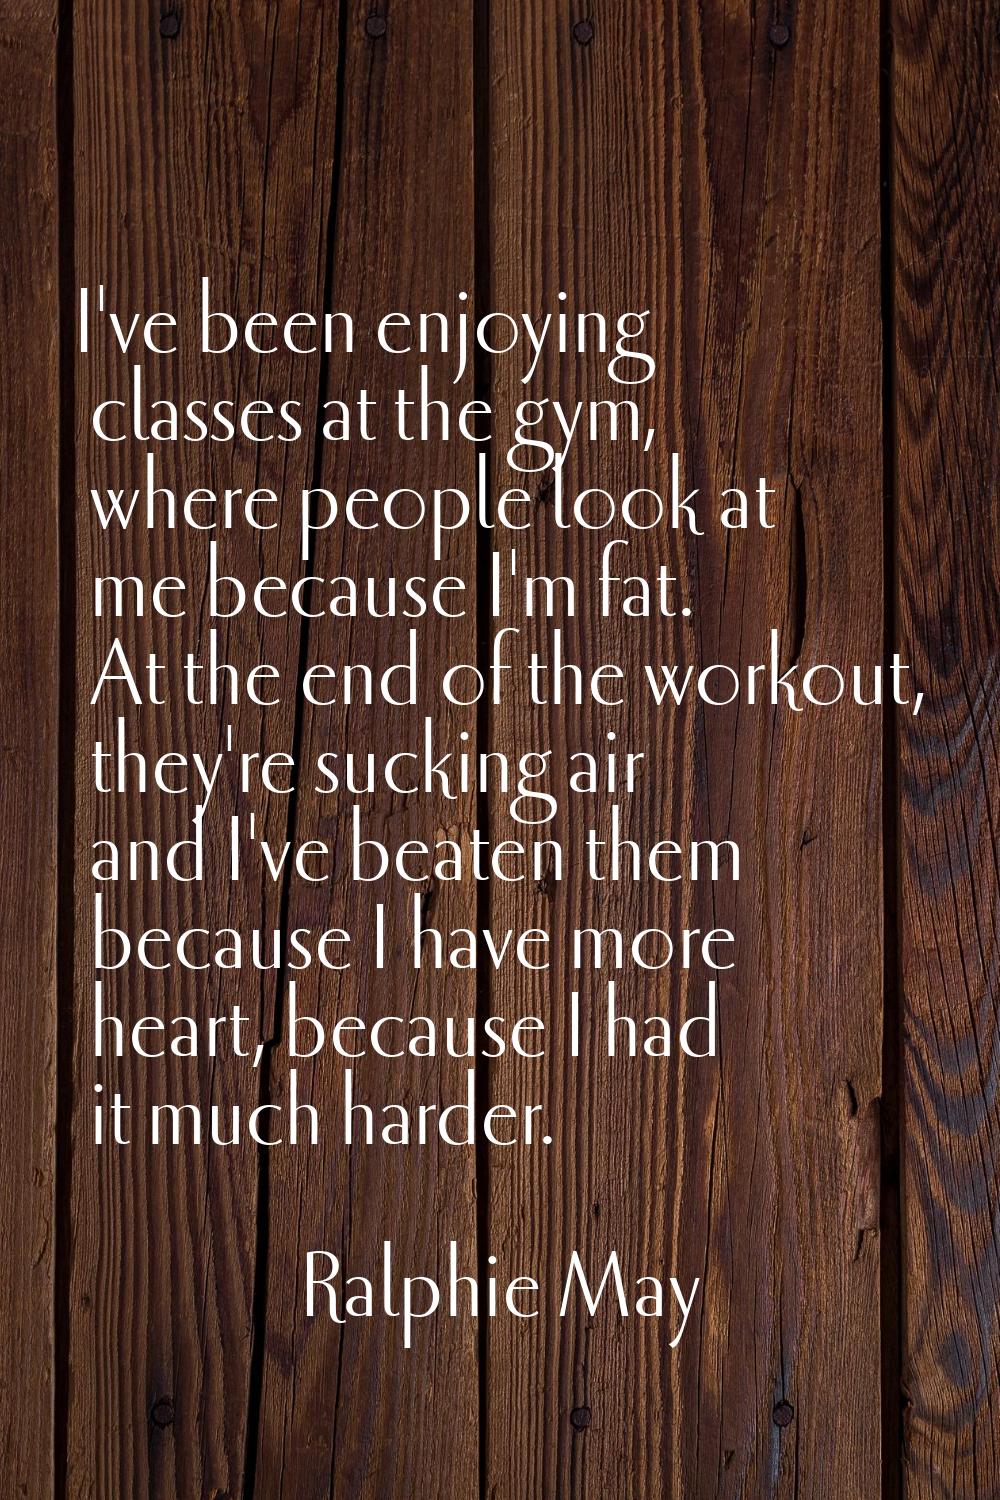 I've been enjoying classes at the gym, where people look at me because I'm fat. At the end of the w